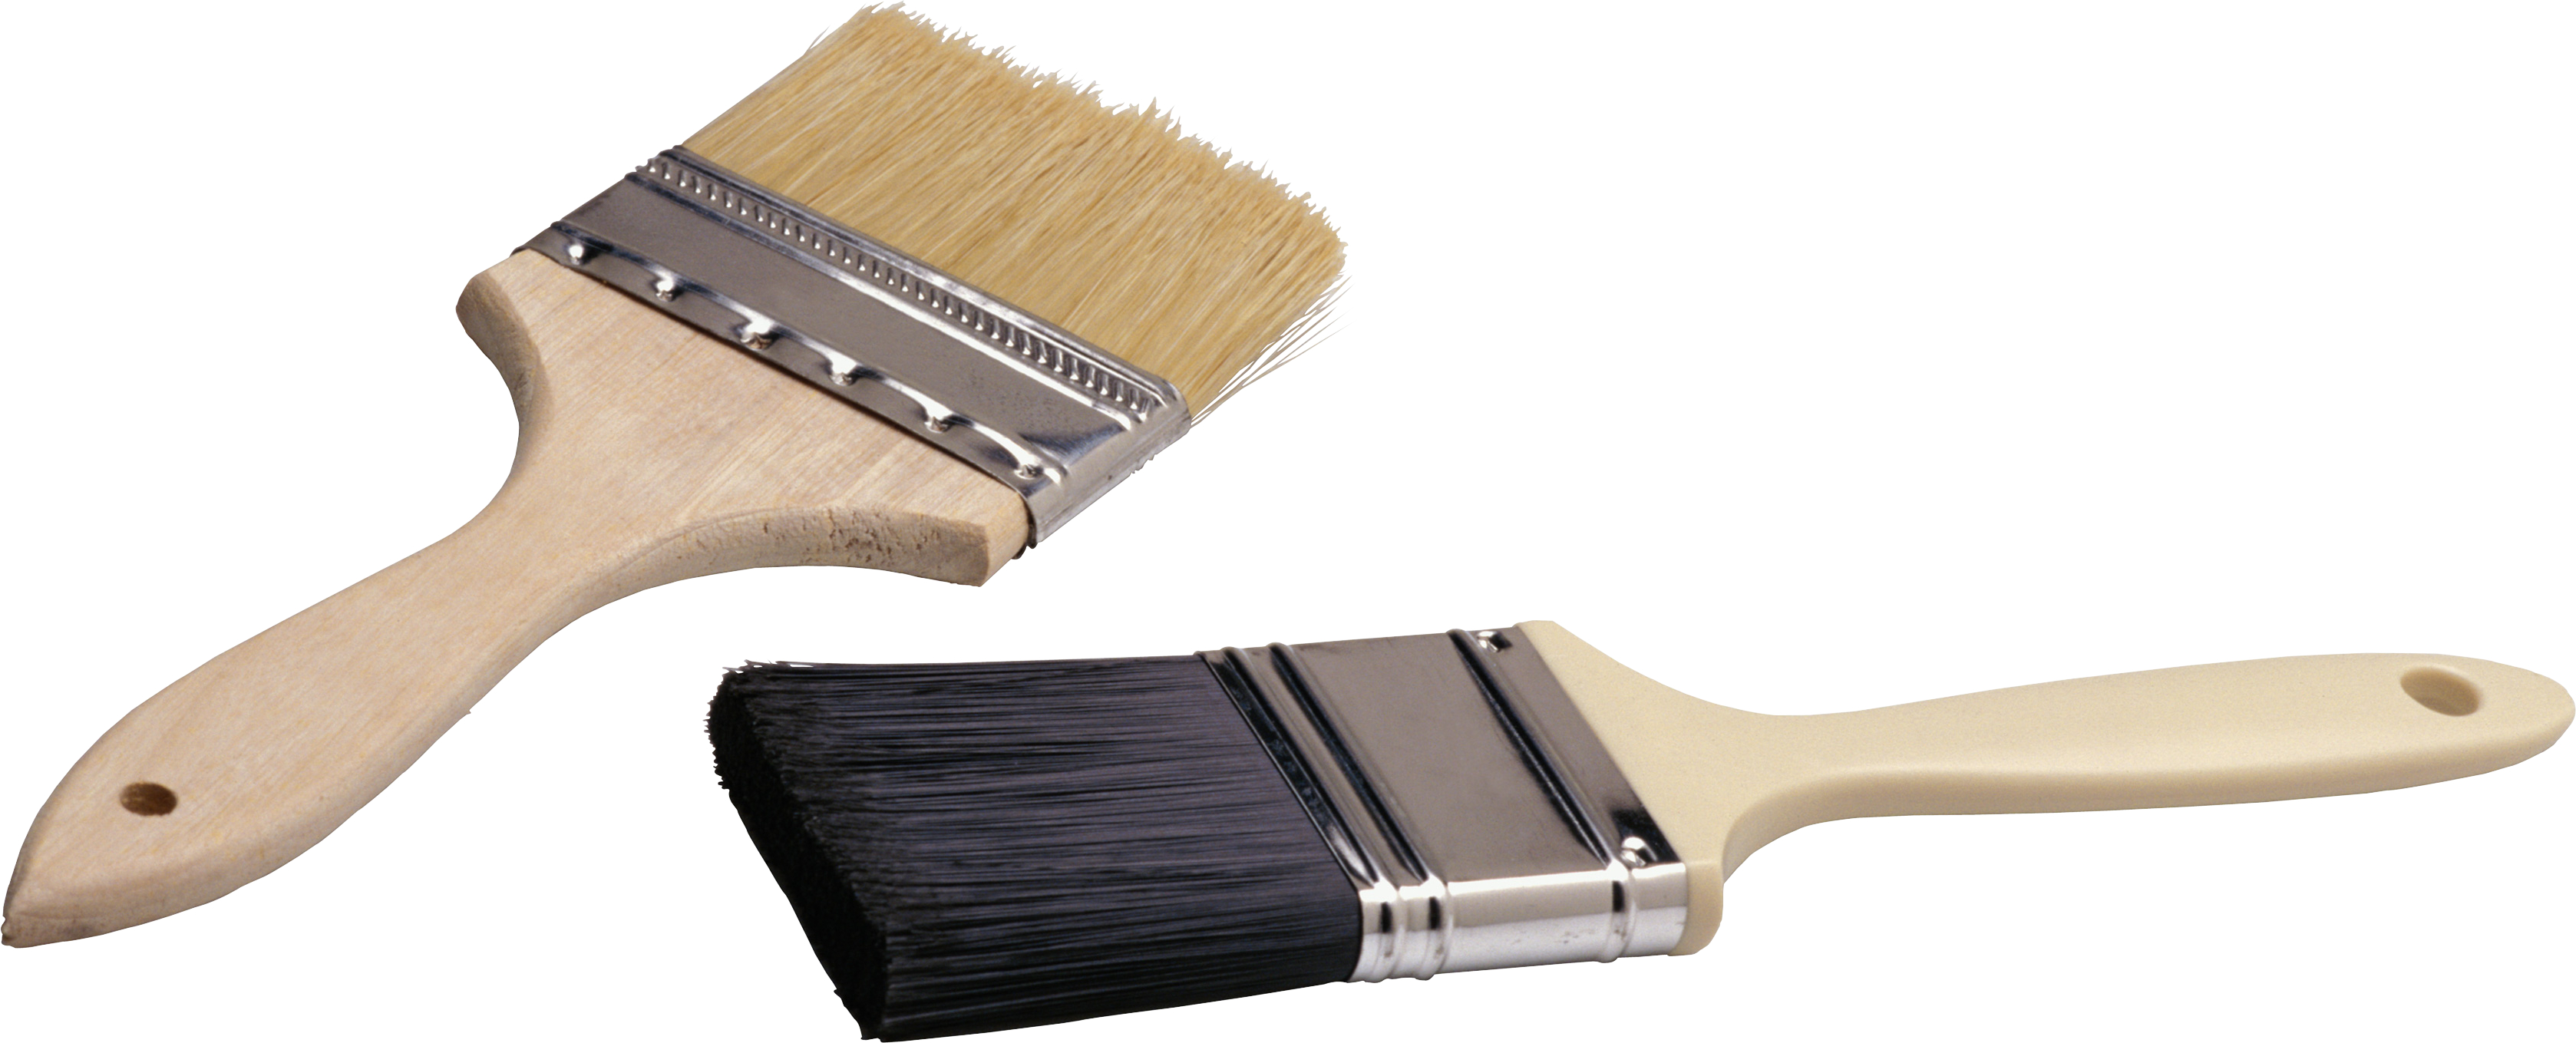 Painting Brush PNG Images HD